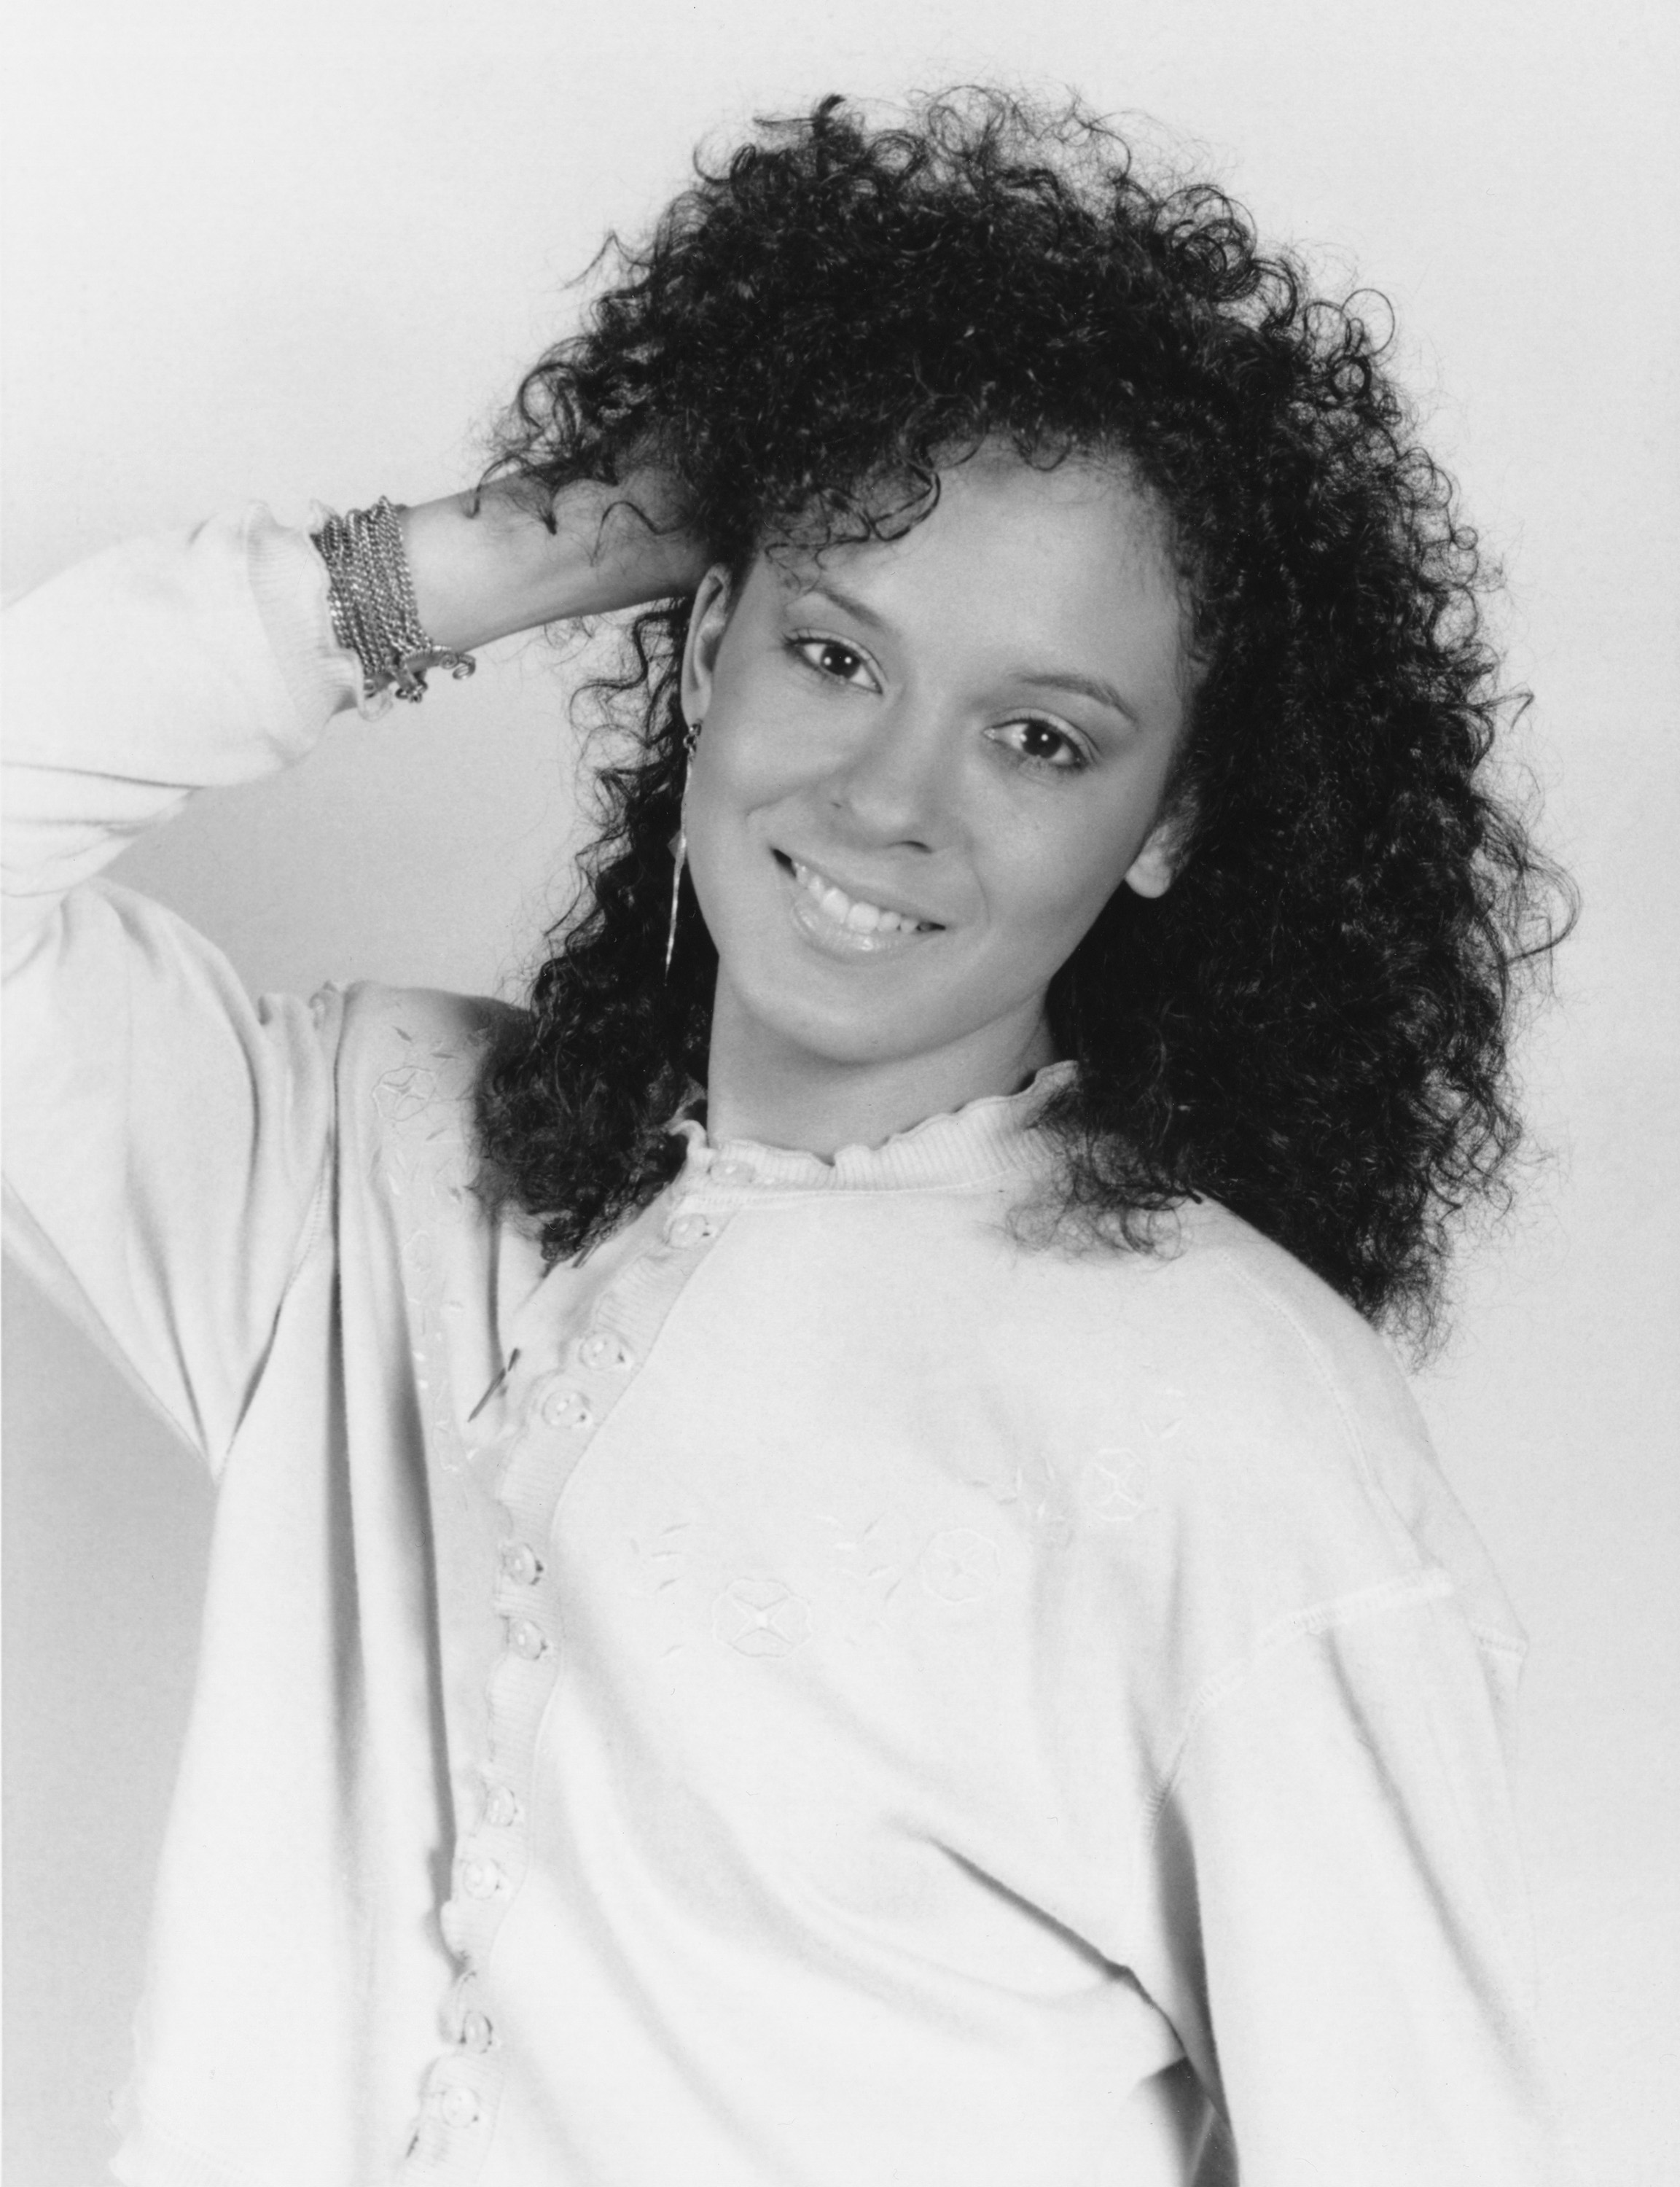 Sabrina Le Beauf as Sondra Huxtable Tibideaux on season 4 of "The Cosby Show" circa 1987 | Source: Getty Images